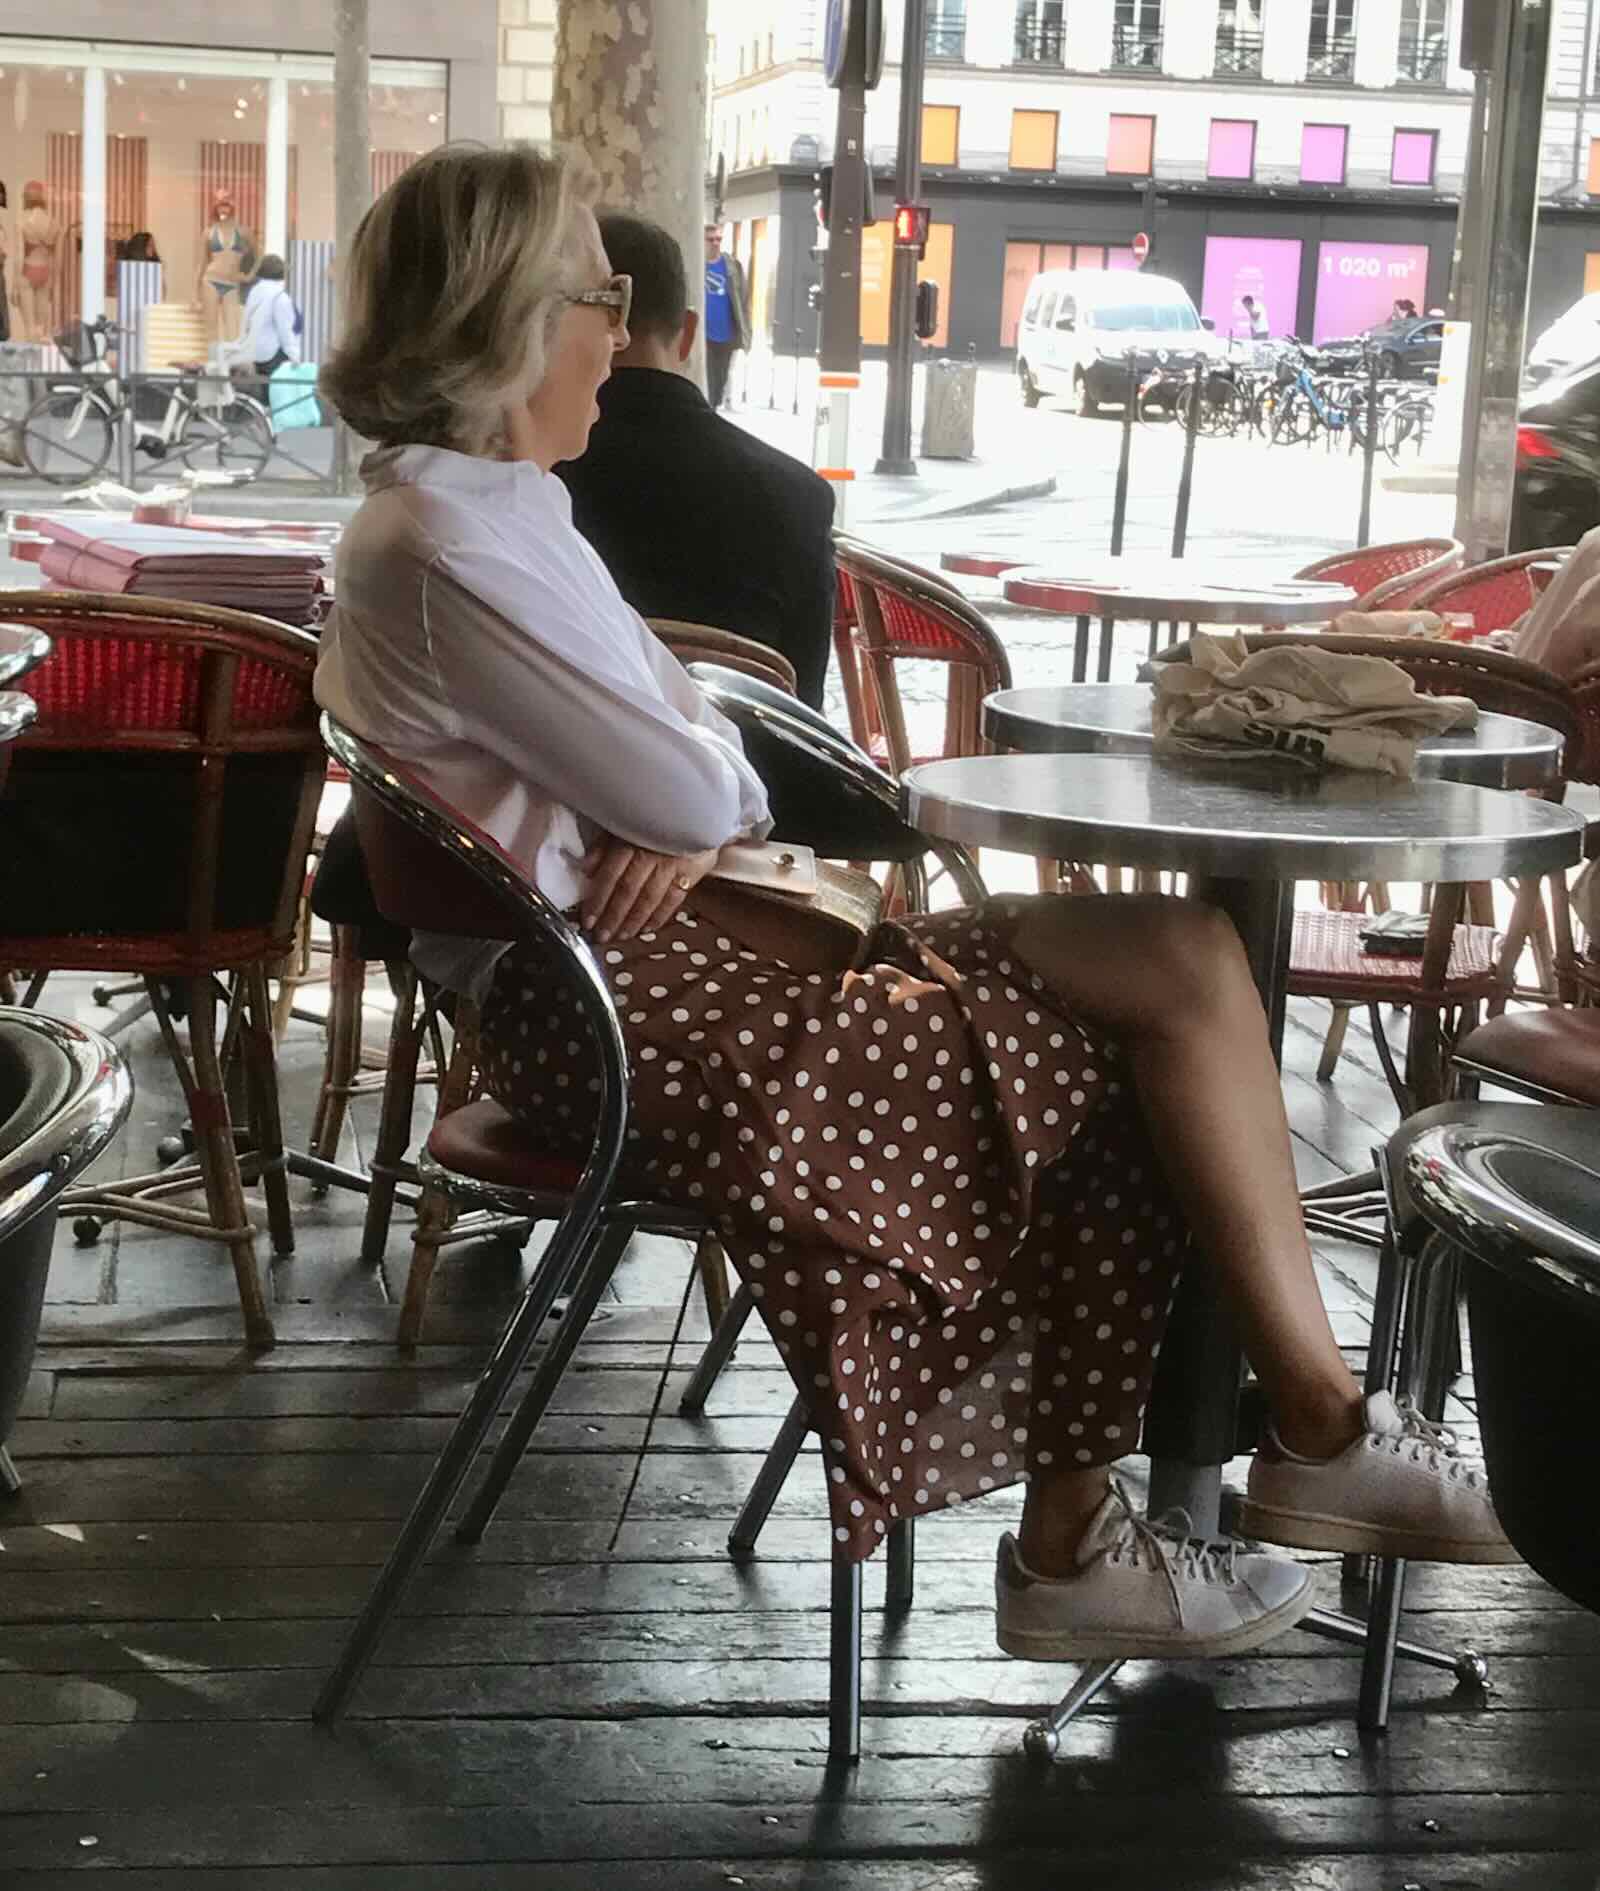 woman in white shirt and red datted skirt in cafe